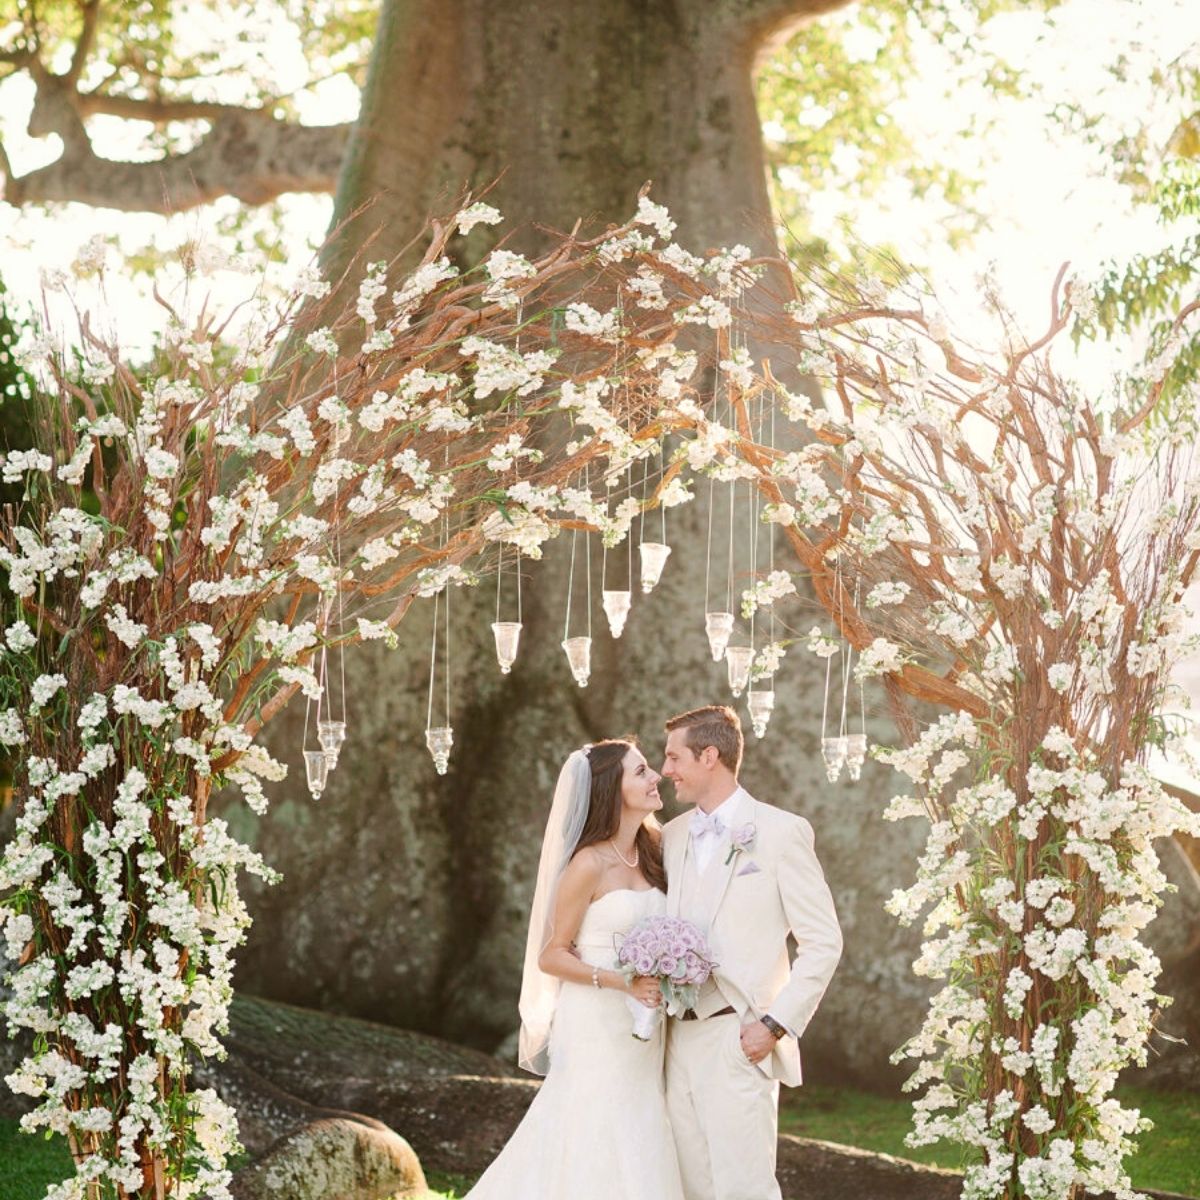 The magic of a wedding arch featured on Thursd